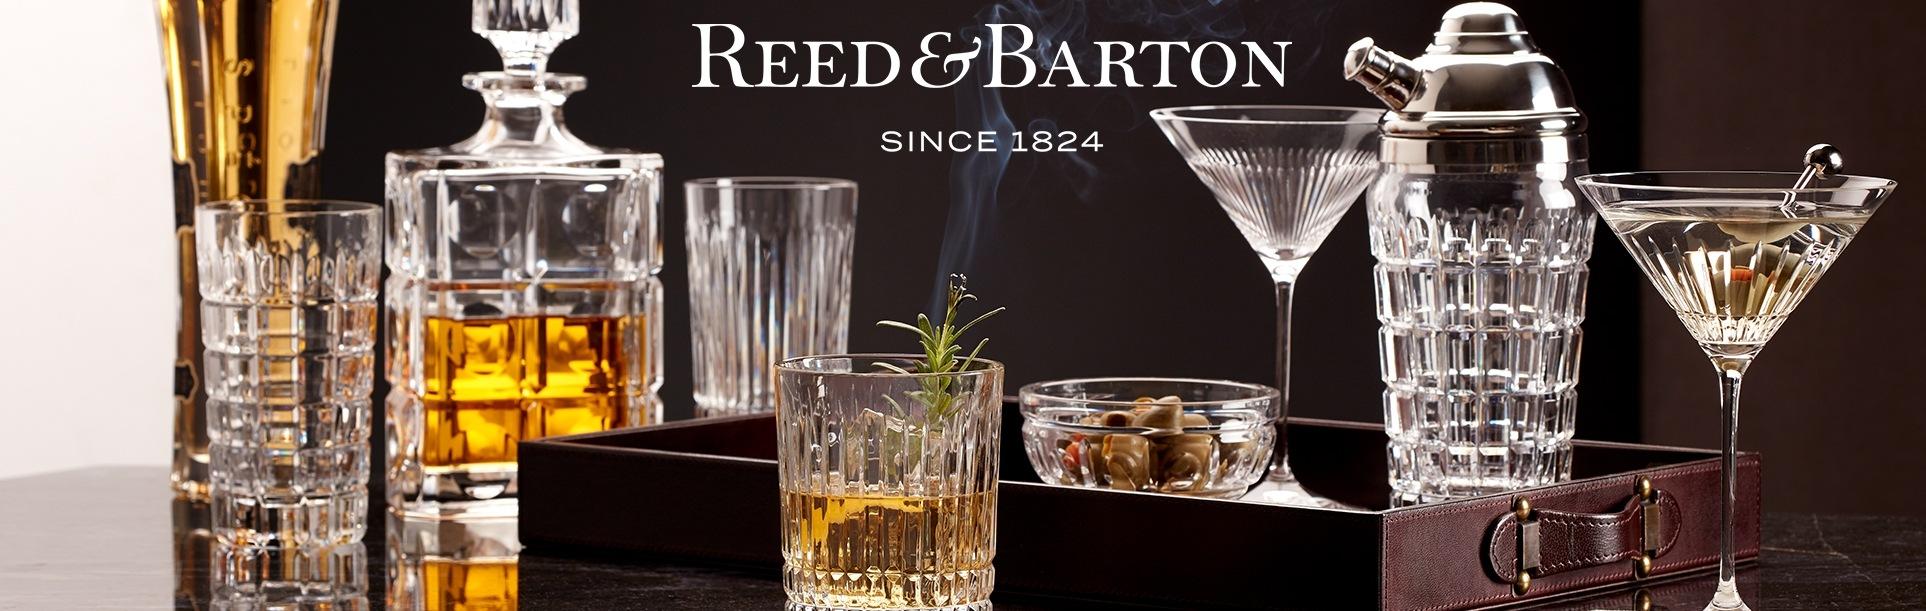 Reed & Barton lifestyle products slide 2